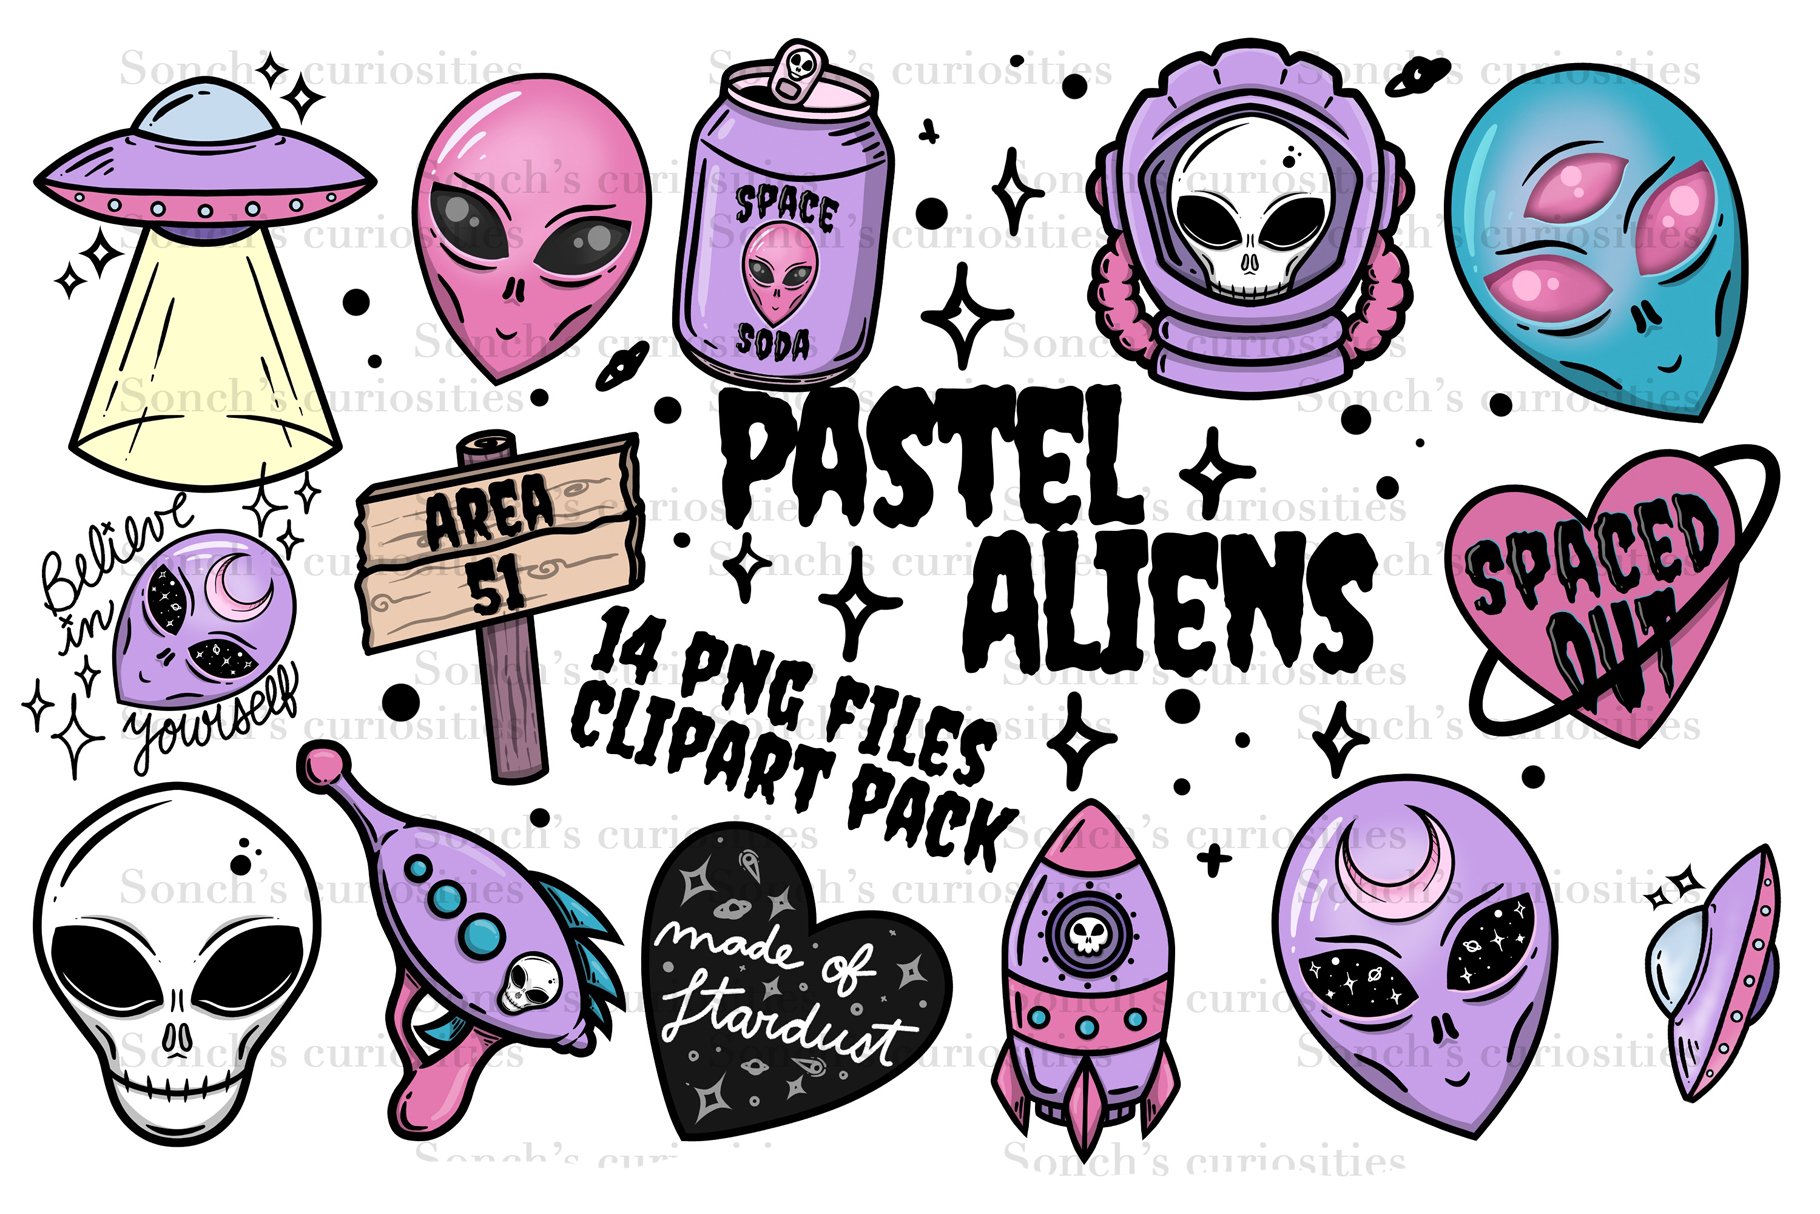 Pastel Aliens / UFO - 14 goth PNG cover image.